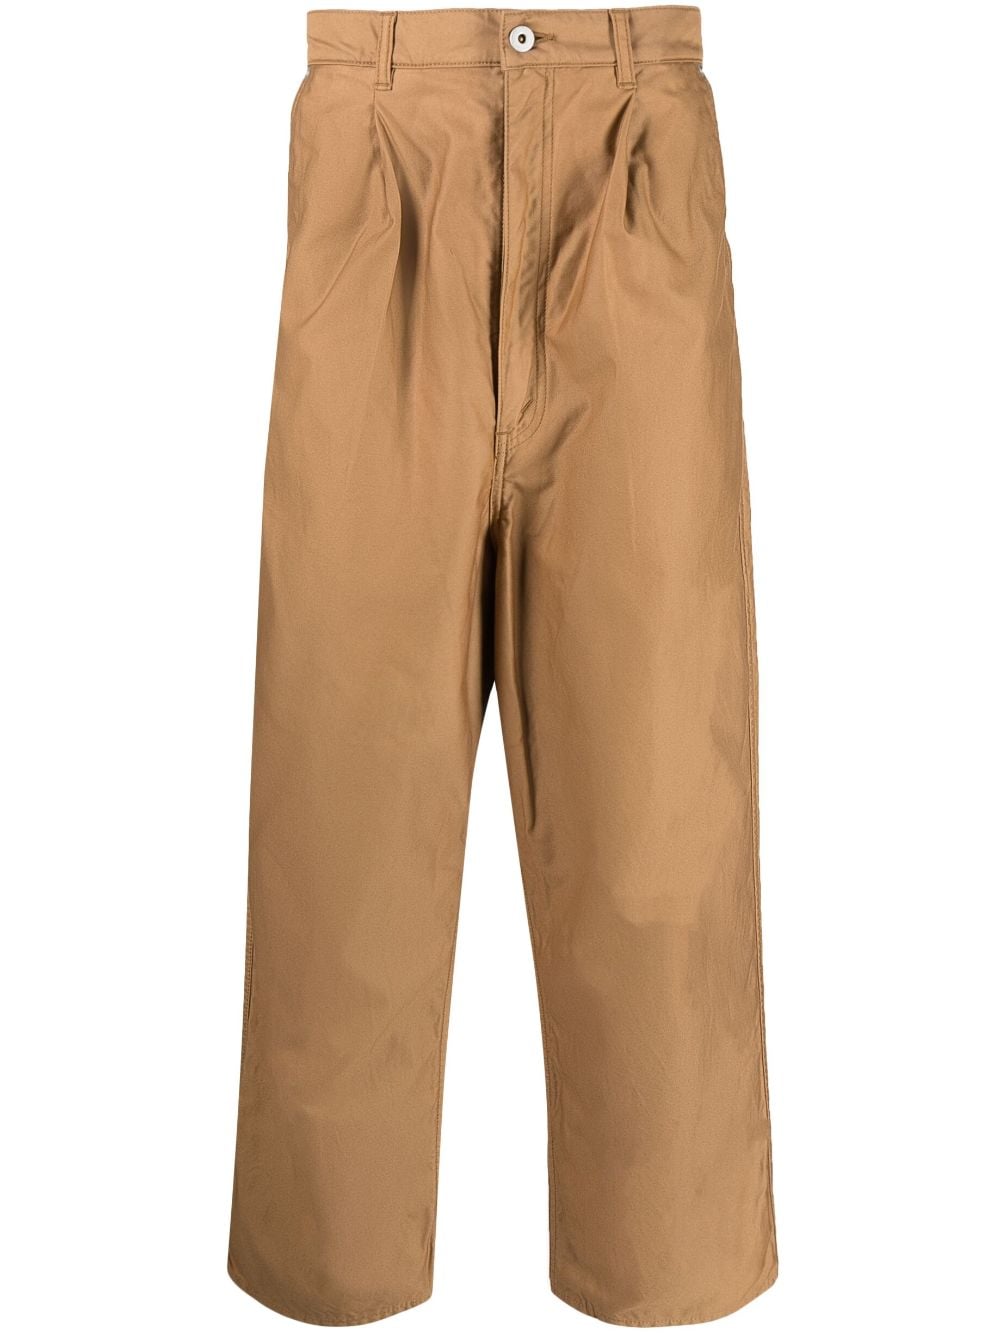 Comme des Garçons Homme high-waisted cropped trousers - Brown von Comme des Garçons Homme